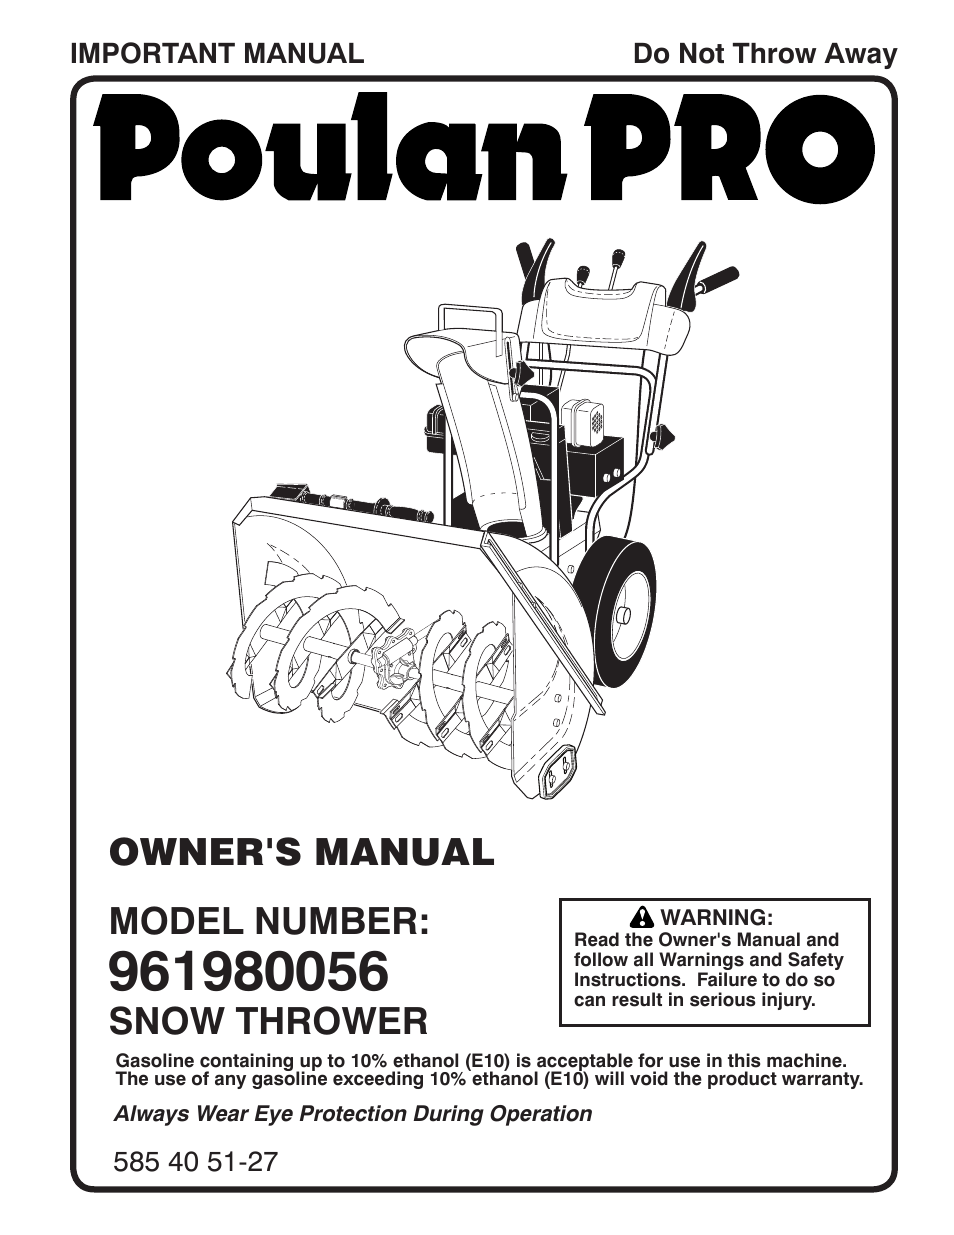 Poulan Pro 961980056 SNOW THROWER User Manual | 44 pages